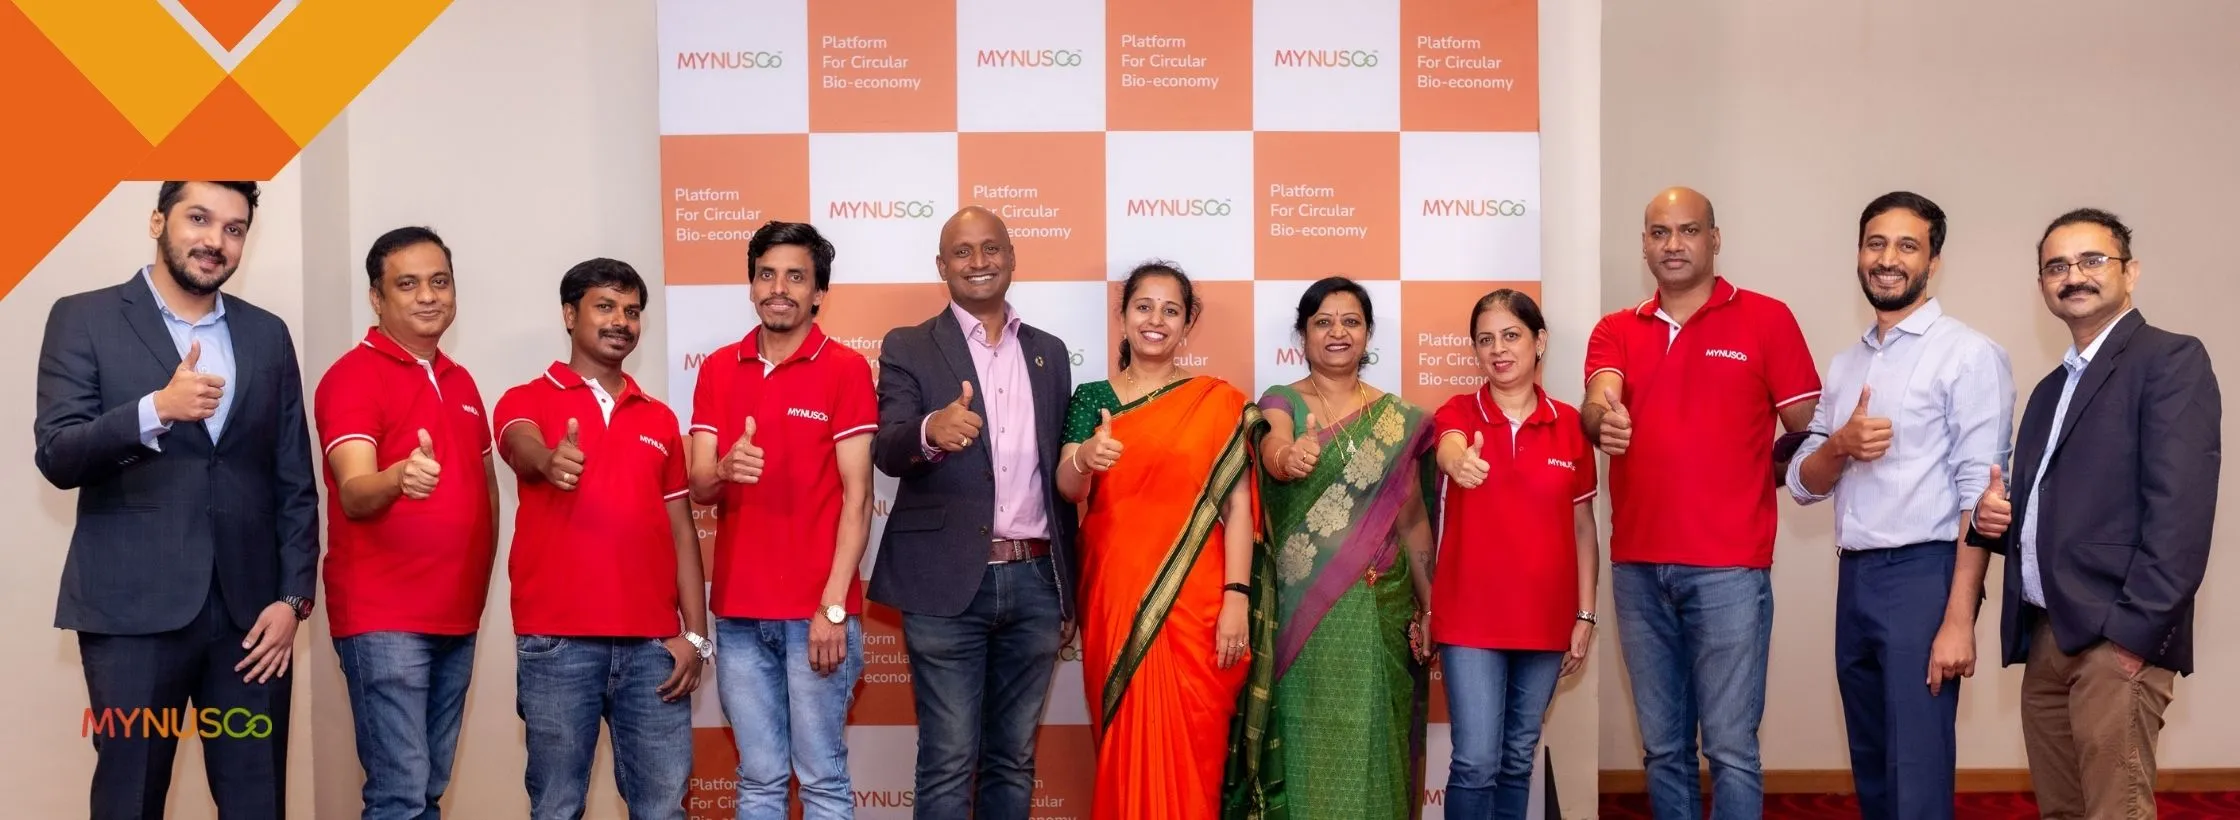 Mynusco, Indian Start-Up Pioneers Biomaterils Platform to Fight Climate Change Indian News Service